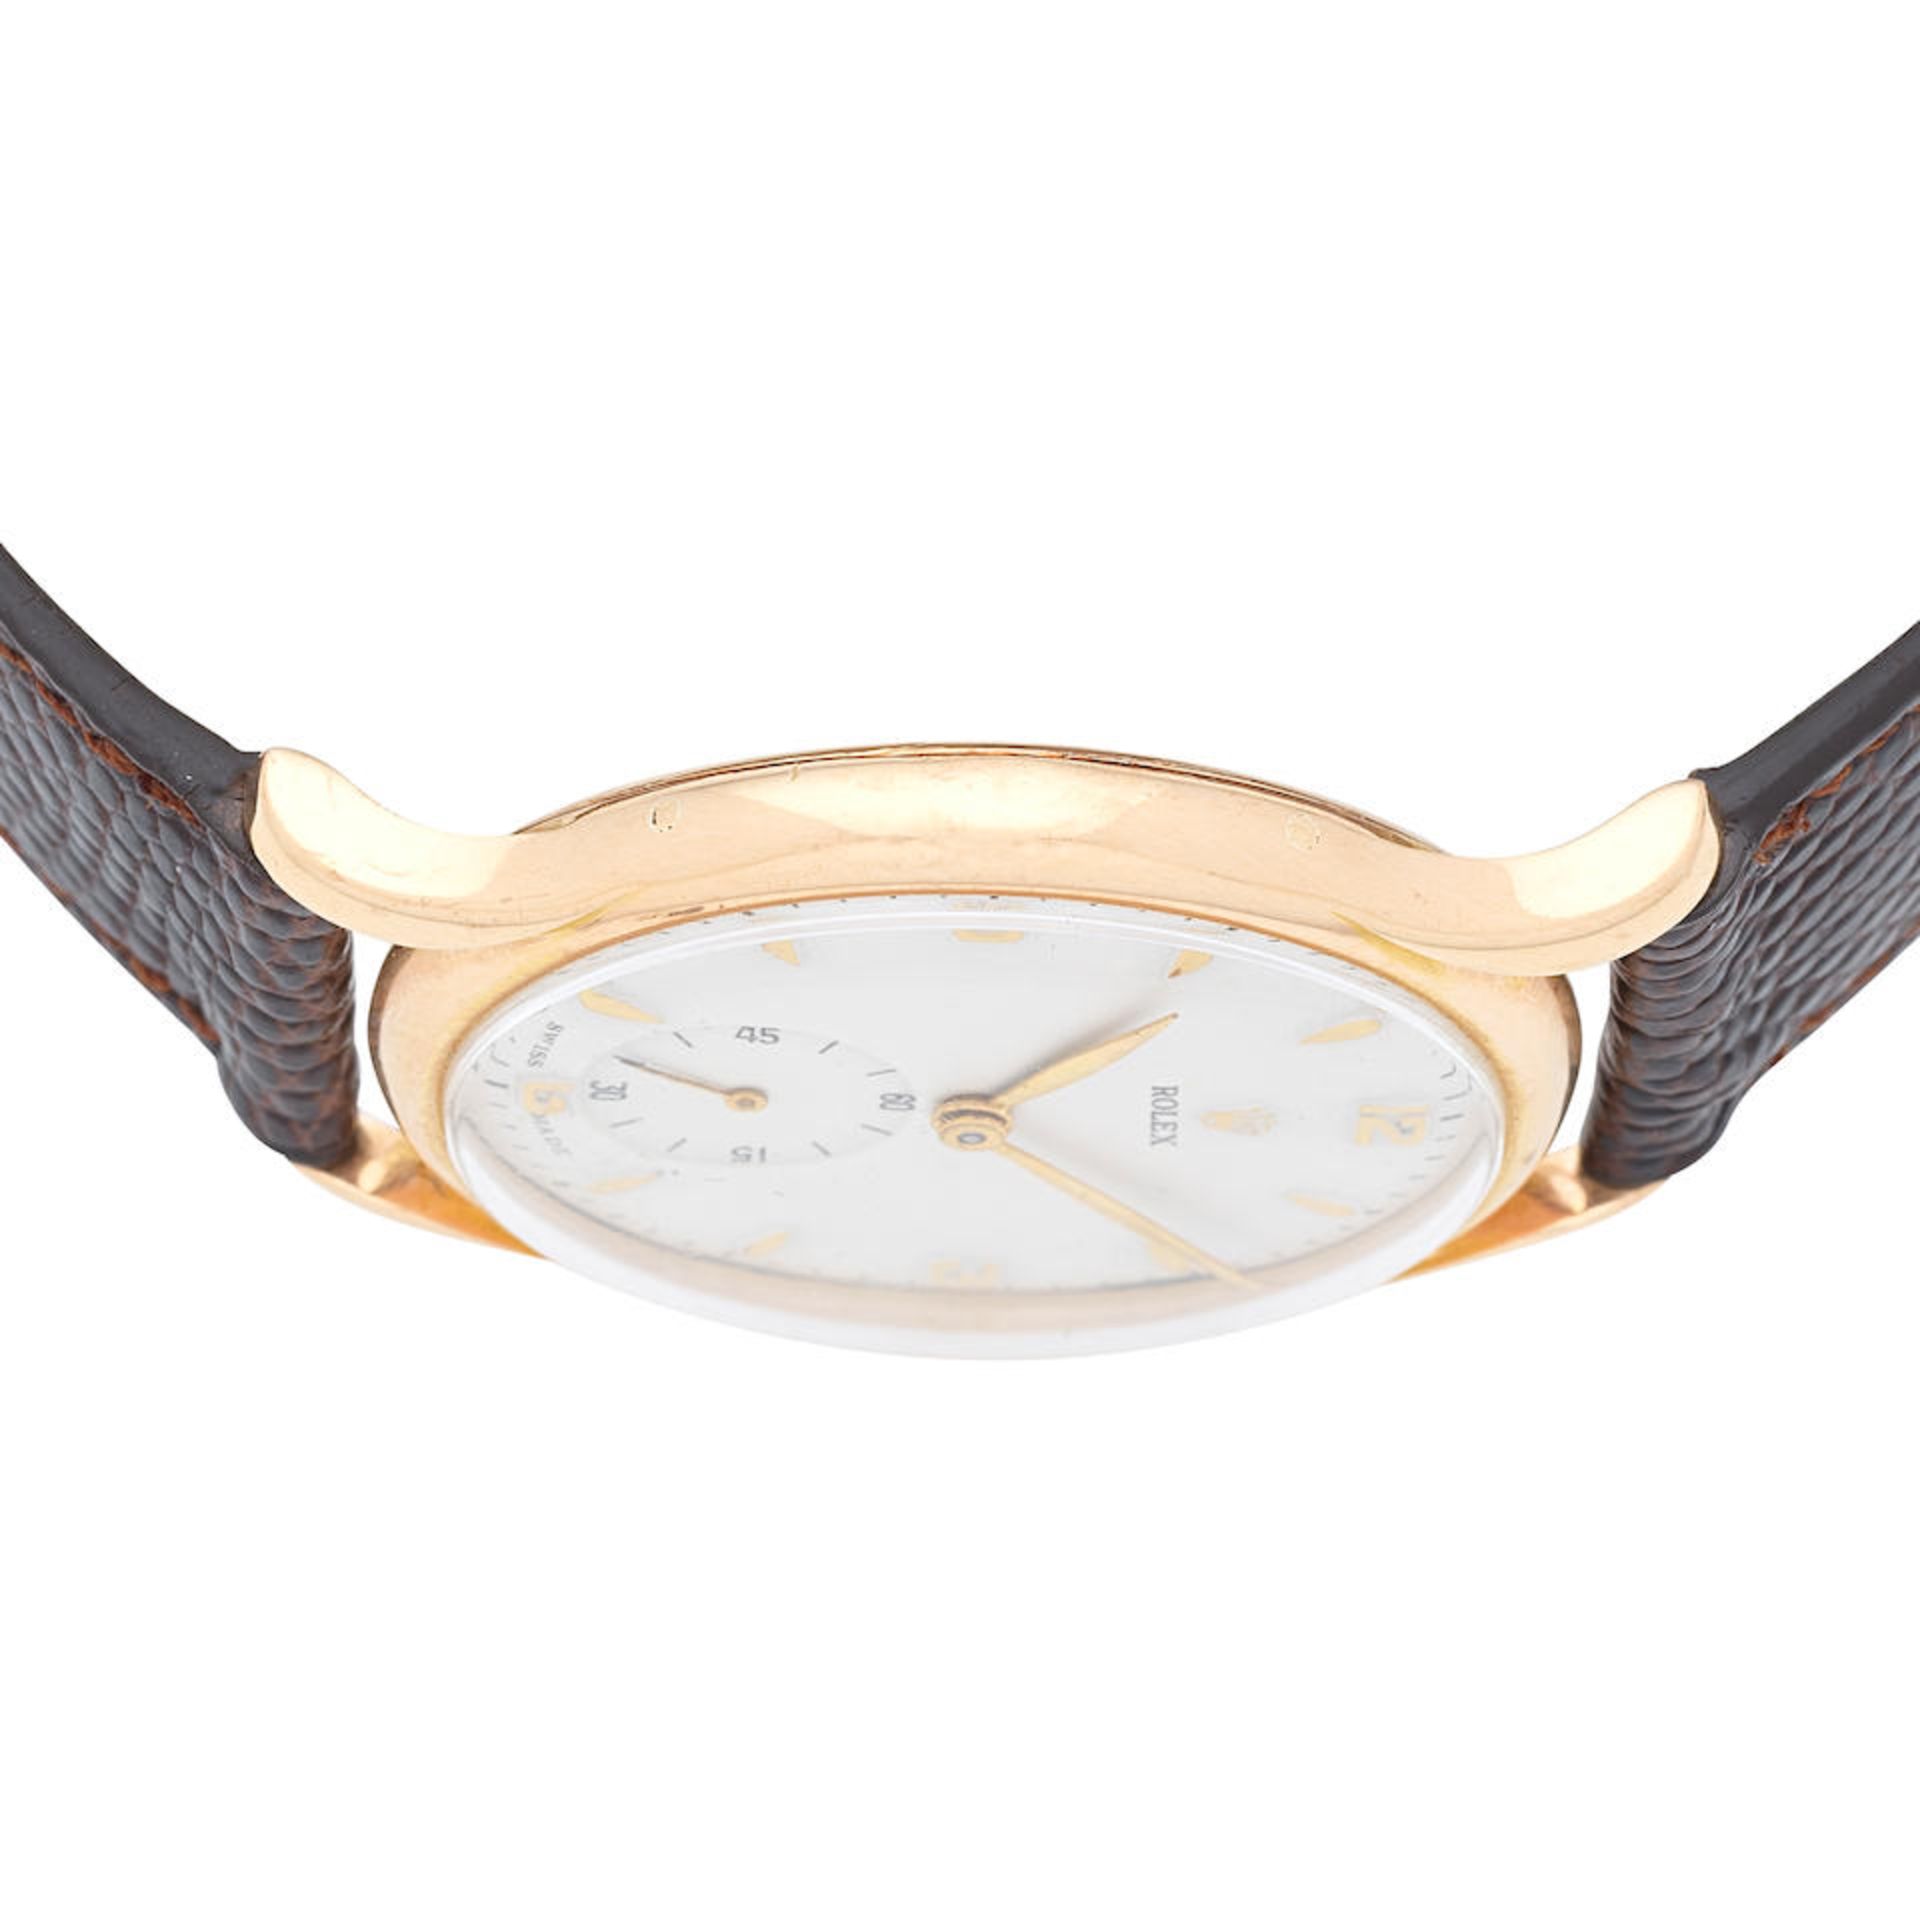 Rolex. An 18K gold manual wind wristwatch with associated case Ref: 3907, Circa 1954 - Image 3 of 5